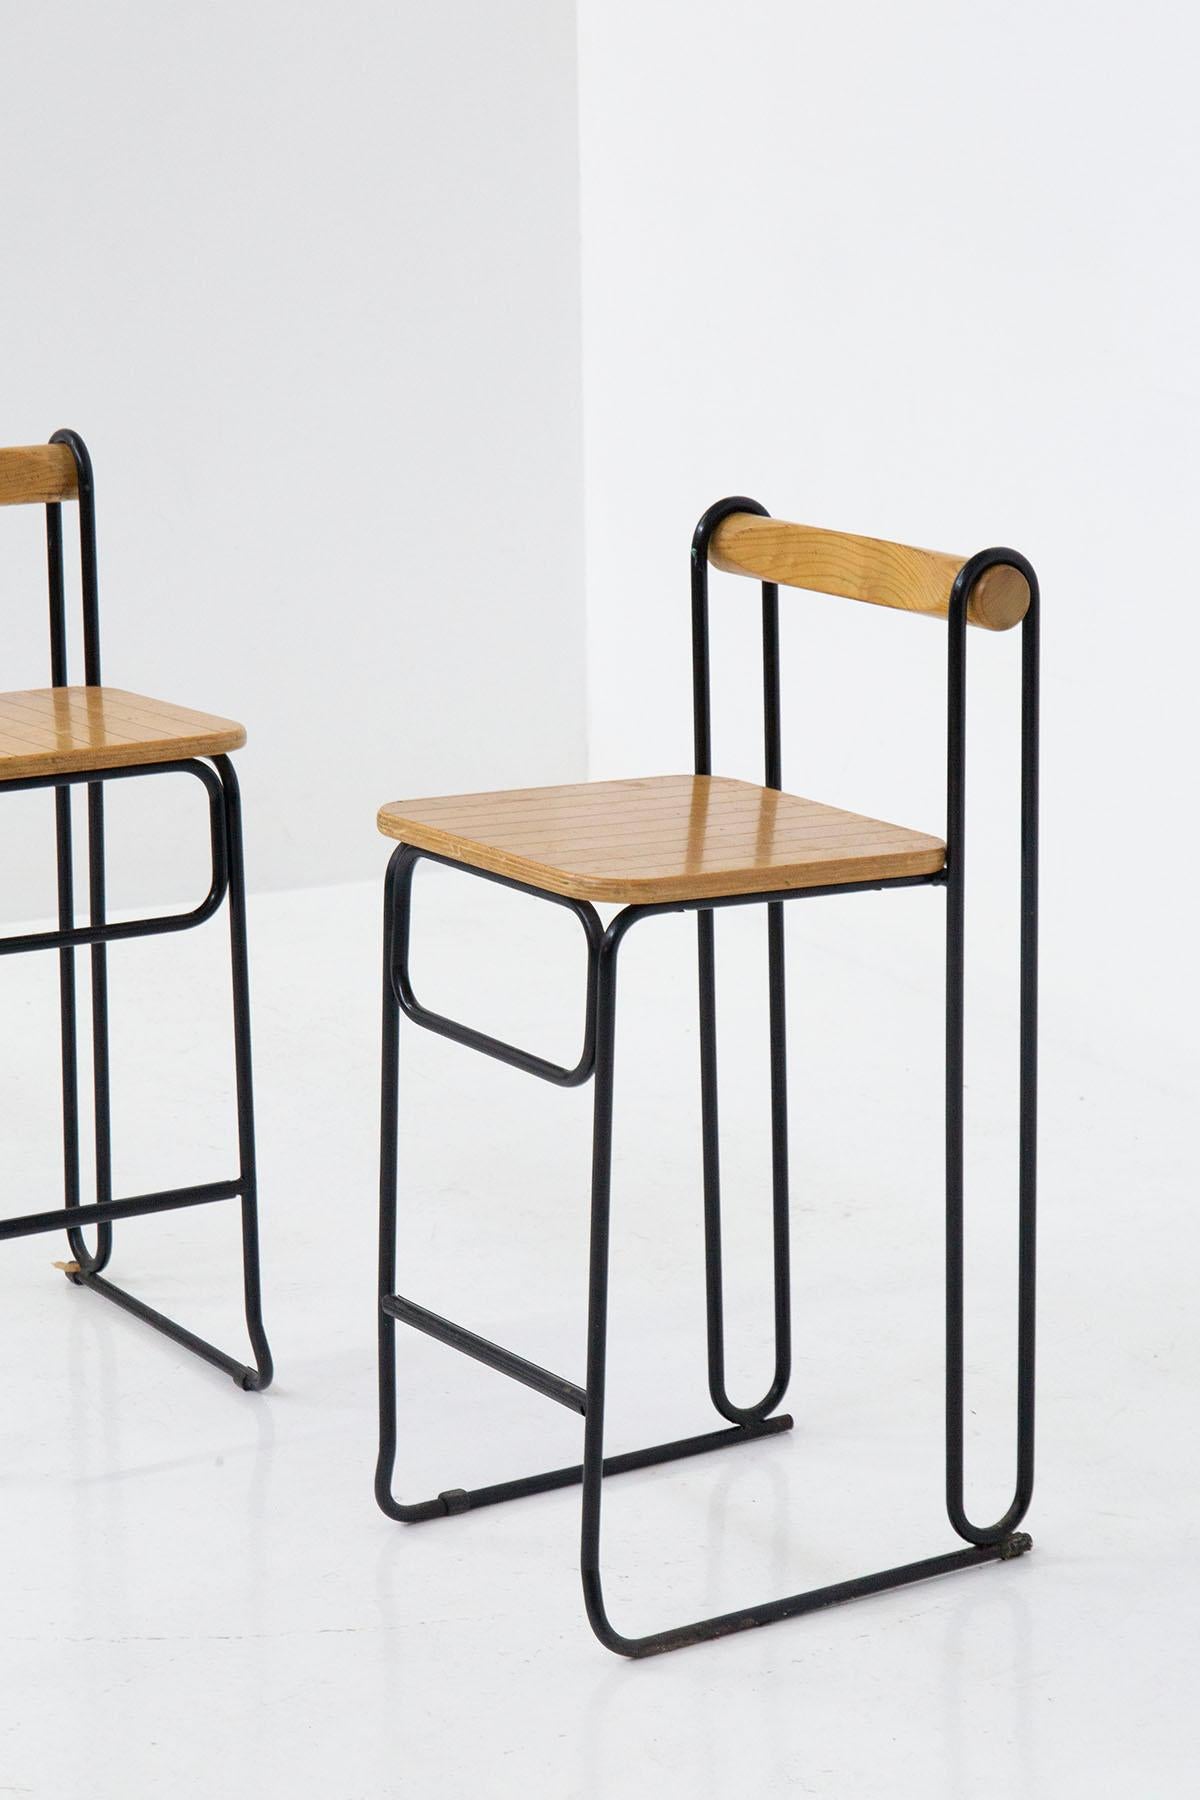 Late 20th Century Geometric Italian Modern High Chairs Set of Four in Iron and Wood